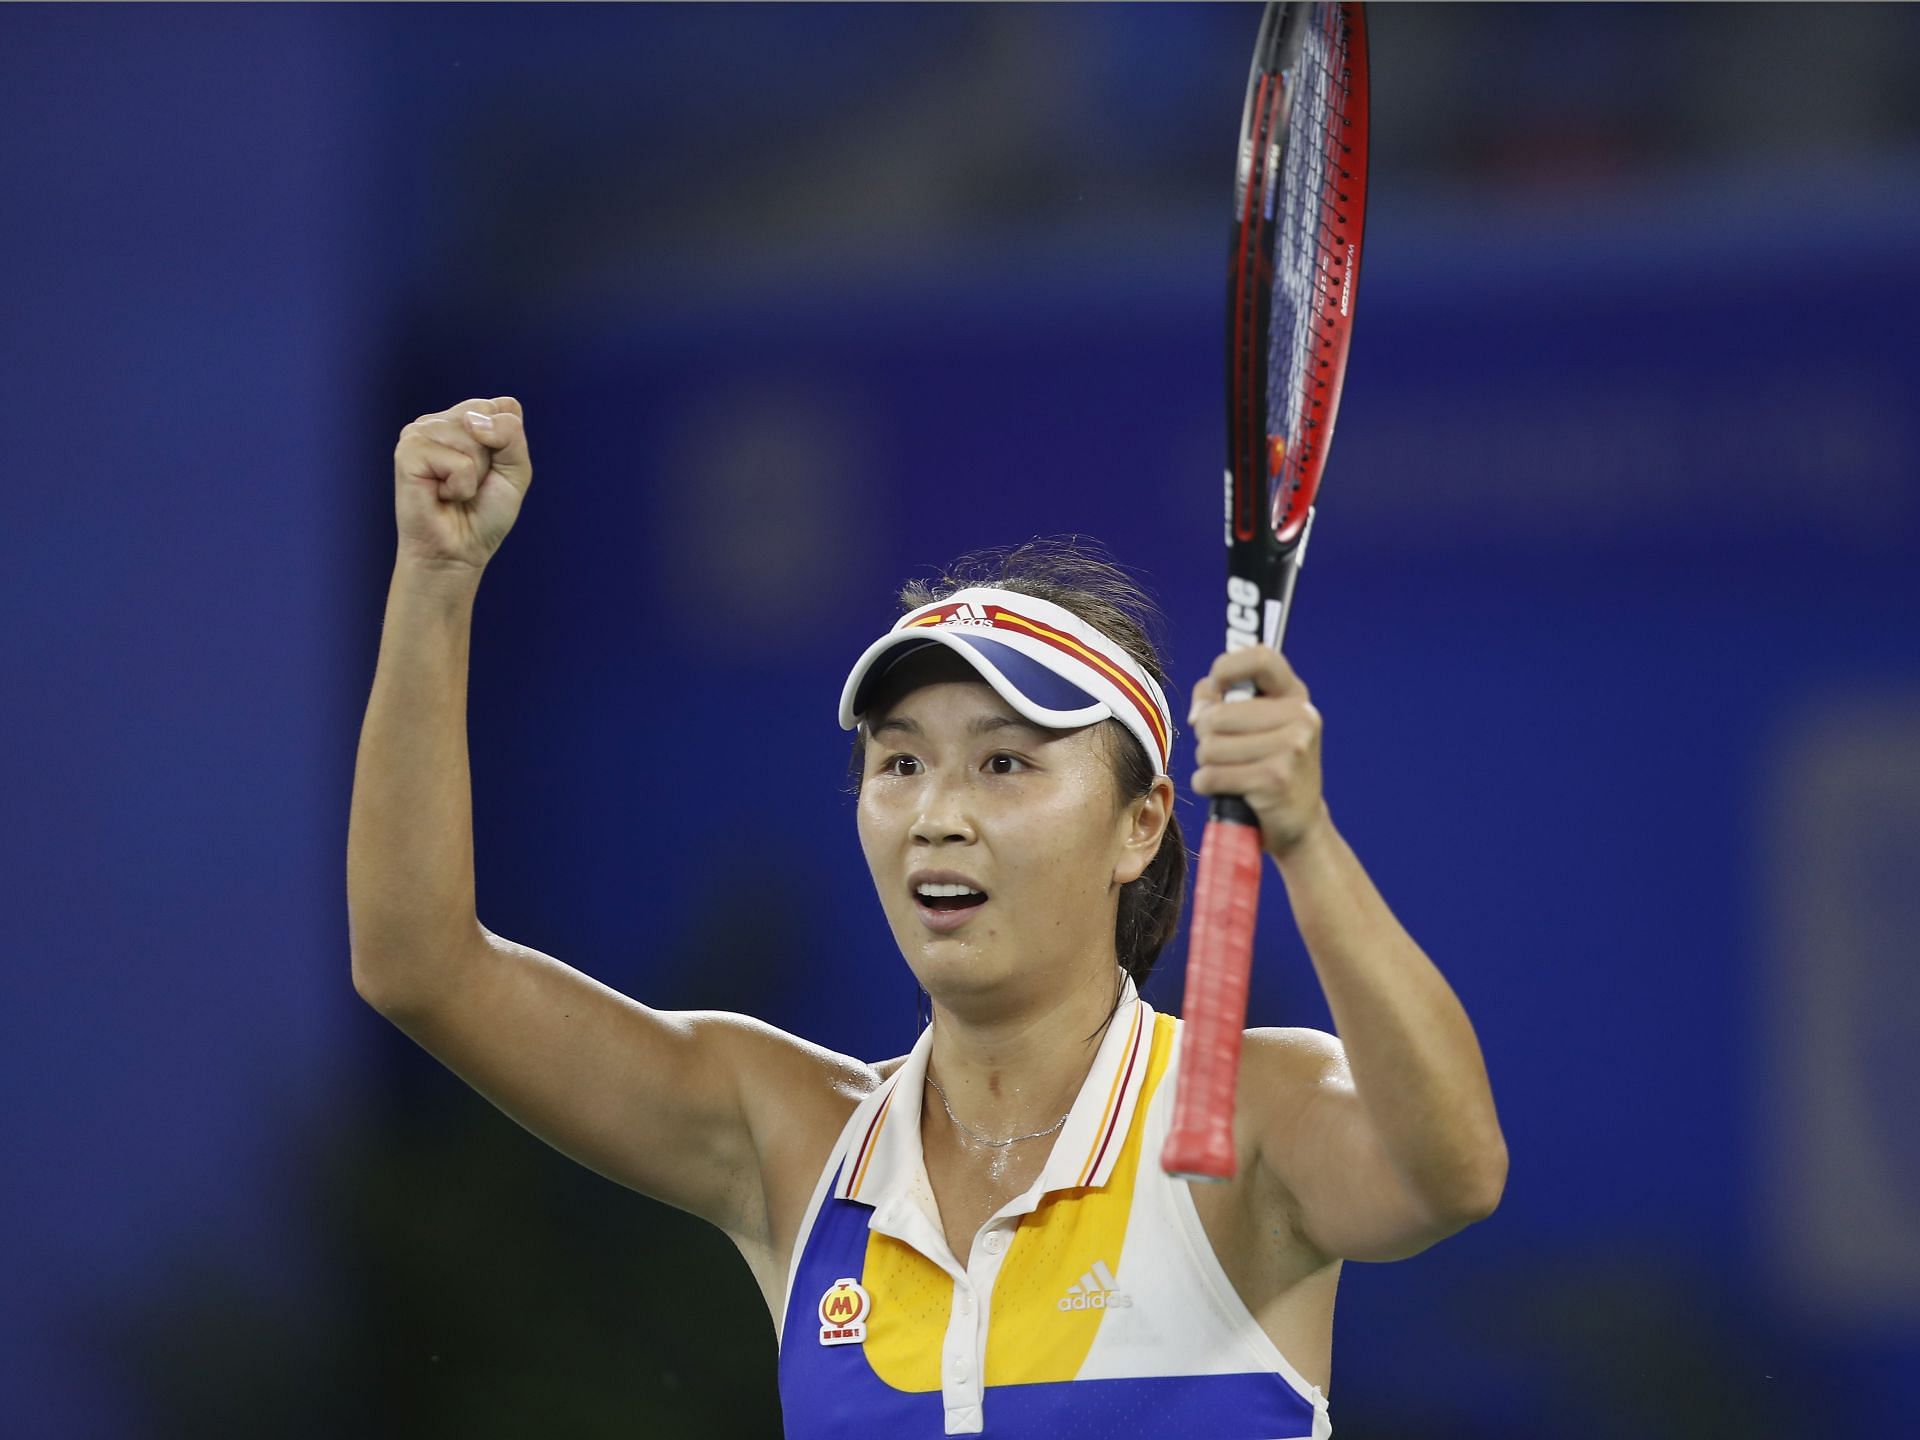 Peng Shuai has made no public statement since coming out with the abuse allegations.